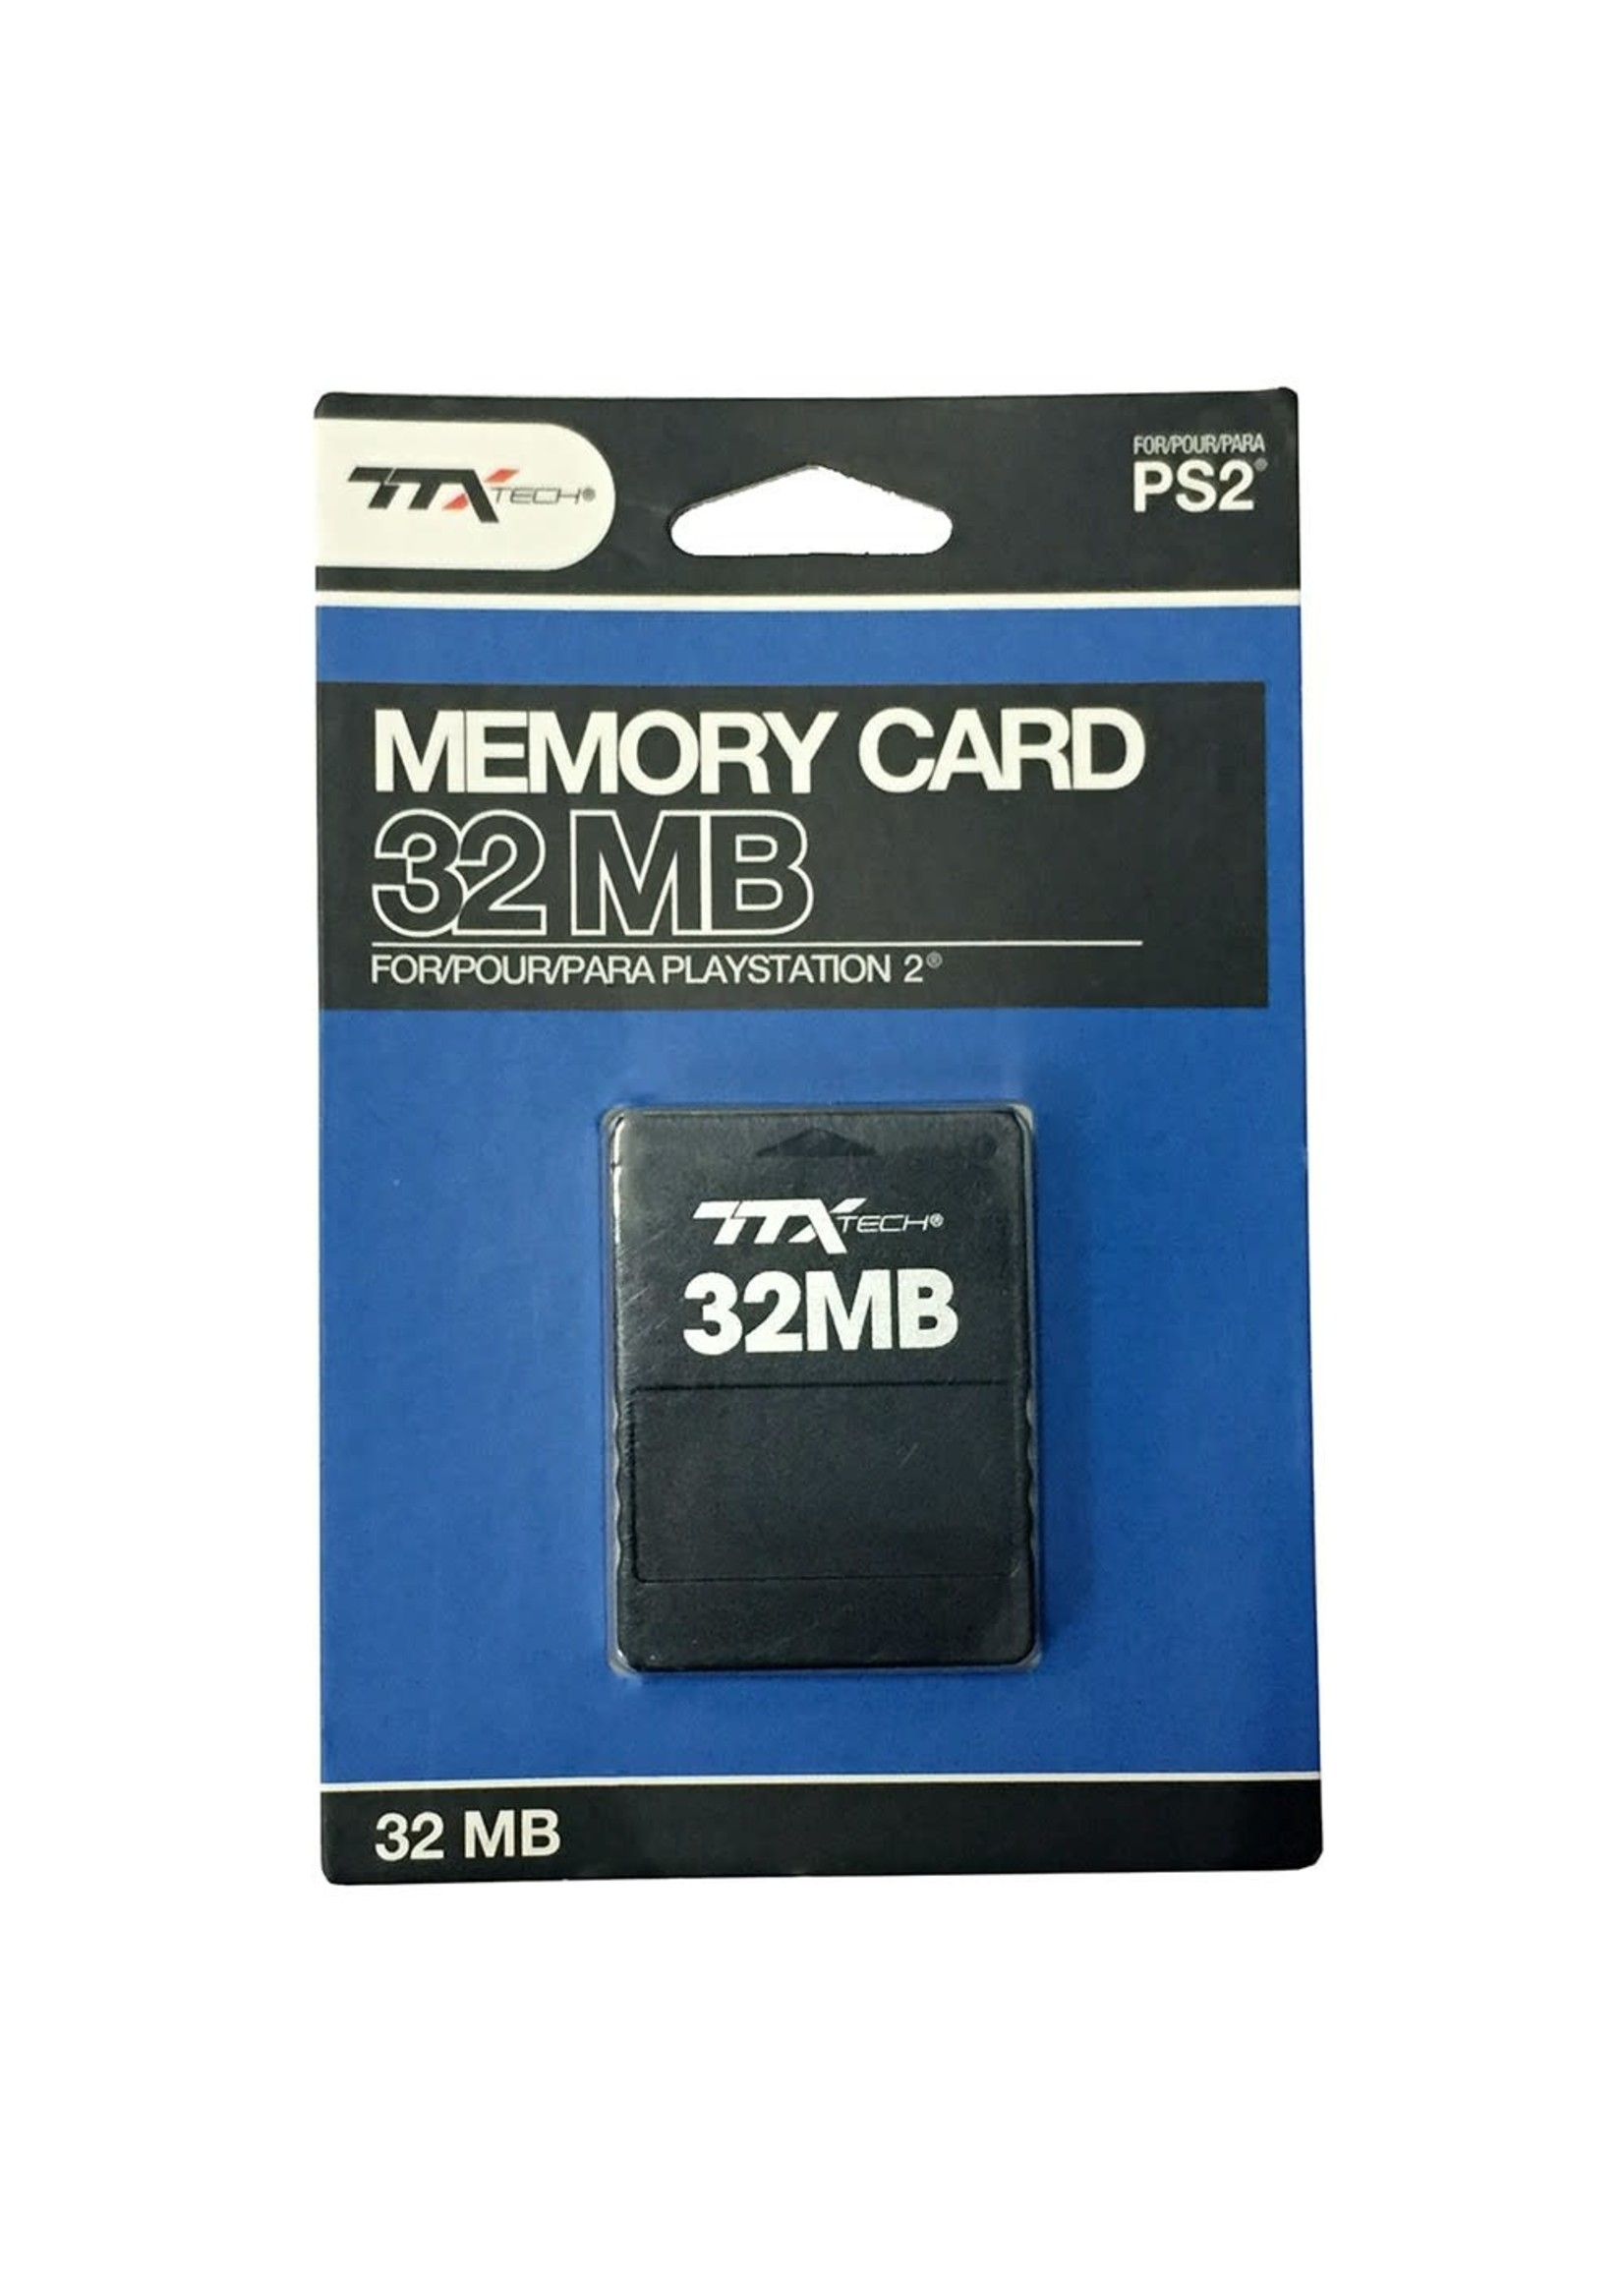 Sony Playstation 2 (PS2) PS2 32 MB Memory Card "TTX Tech"